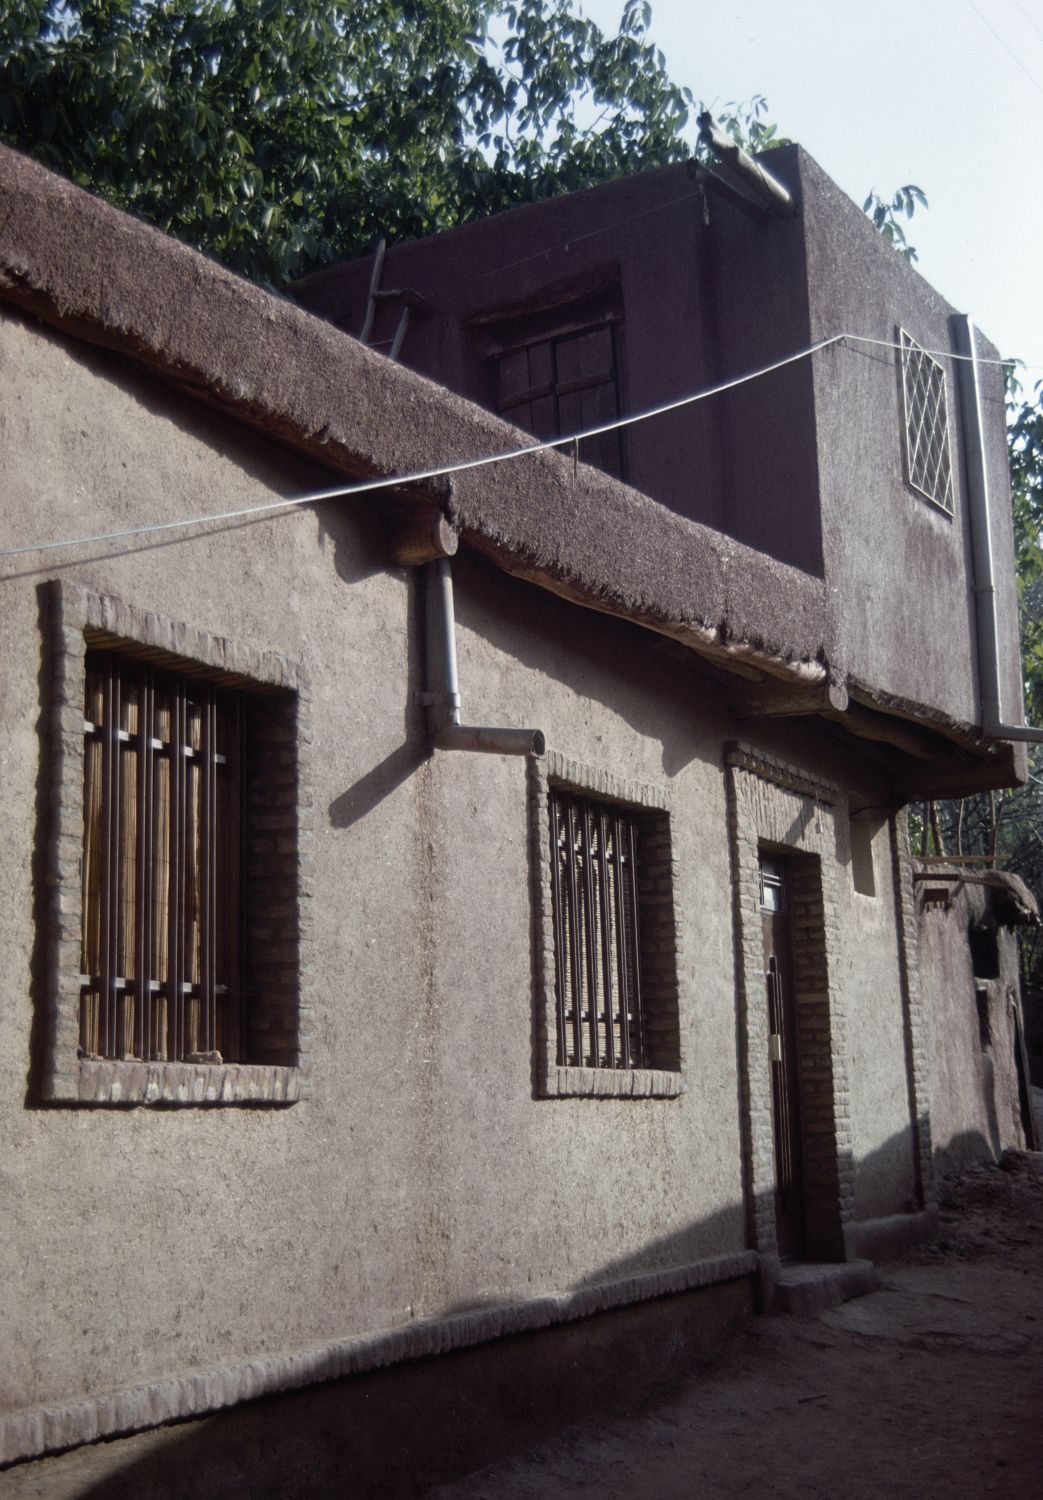 Abyanah  - A house in Abyanah, Iran.